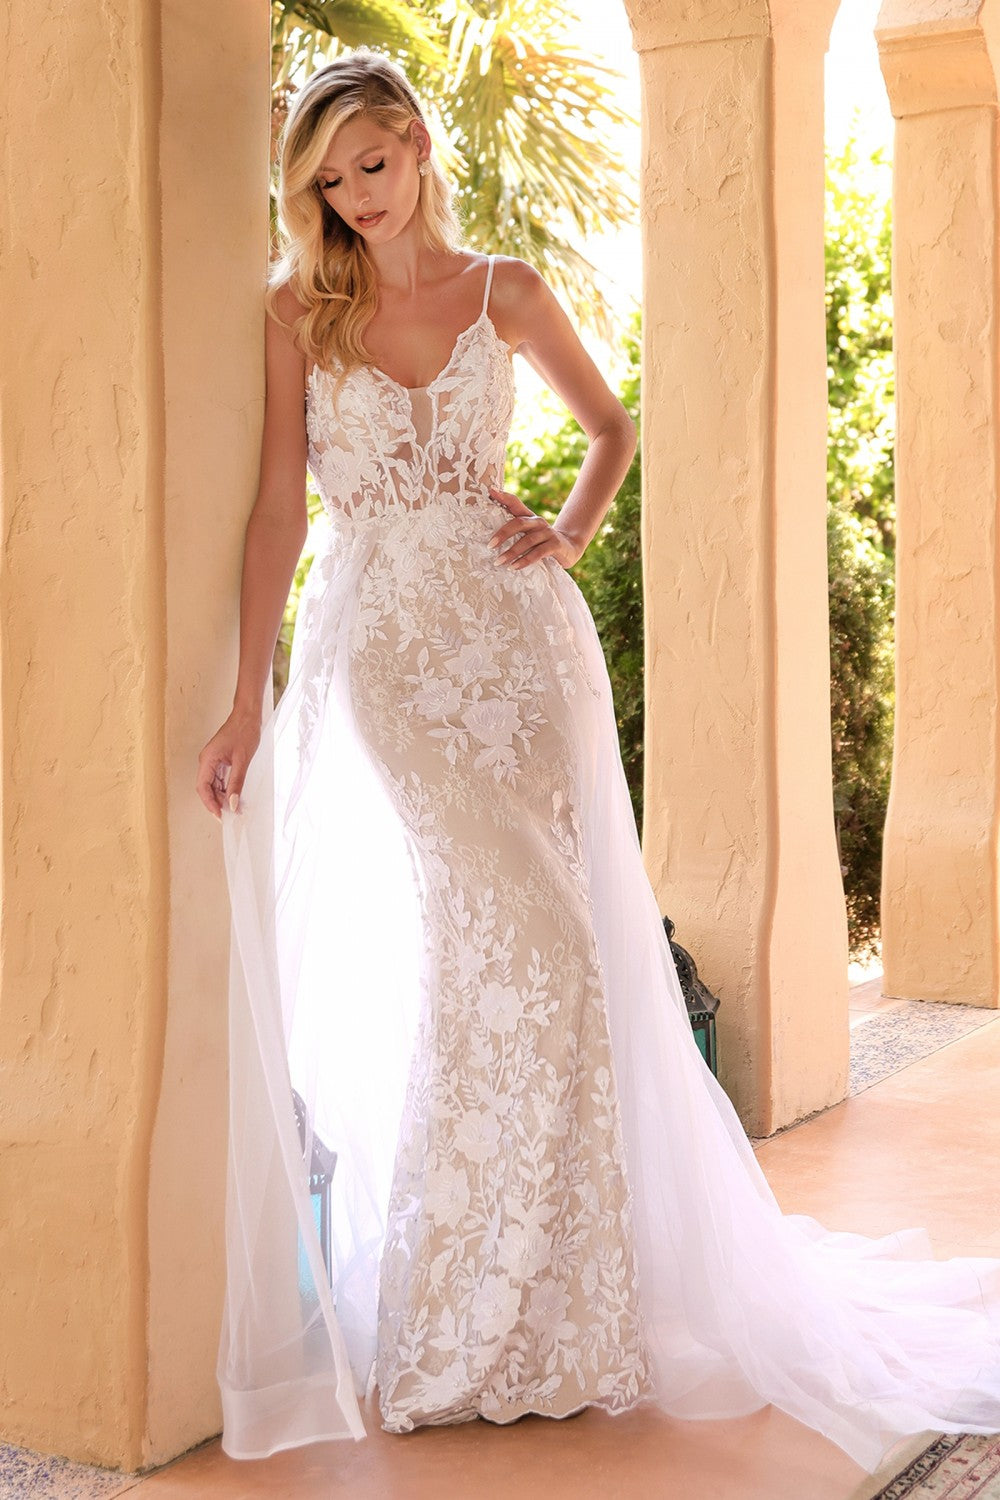 Nora Wedding Dress with Tulle Train and Lace accents on bodice